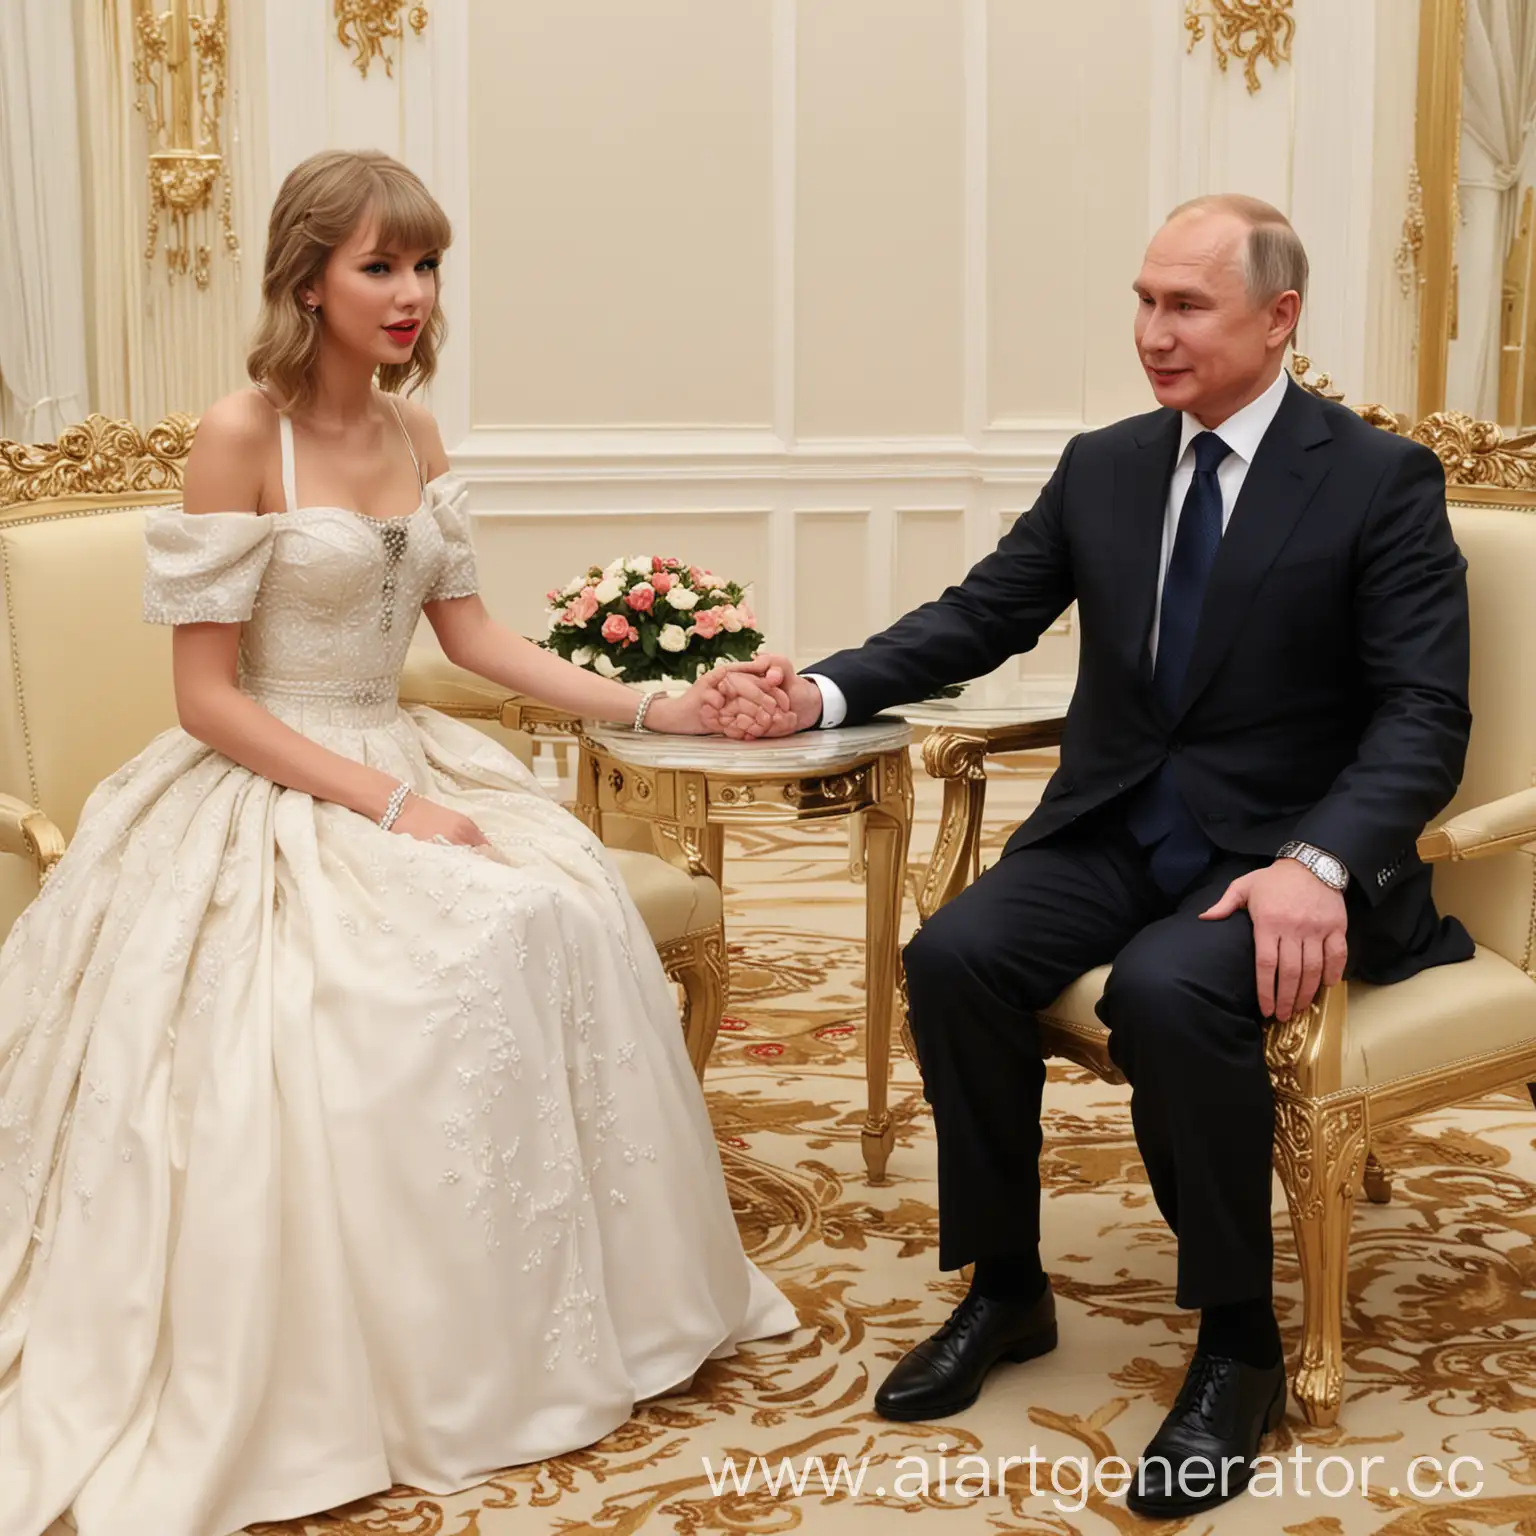 Taylor-Swift-and-Vladimir-Putin-Unexpected-Encounter-of-Global-Icons